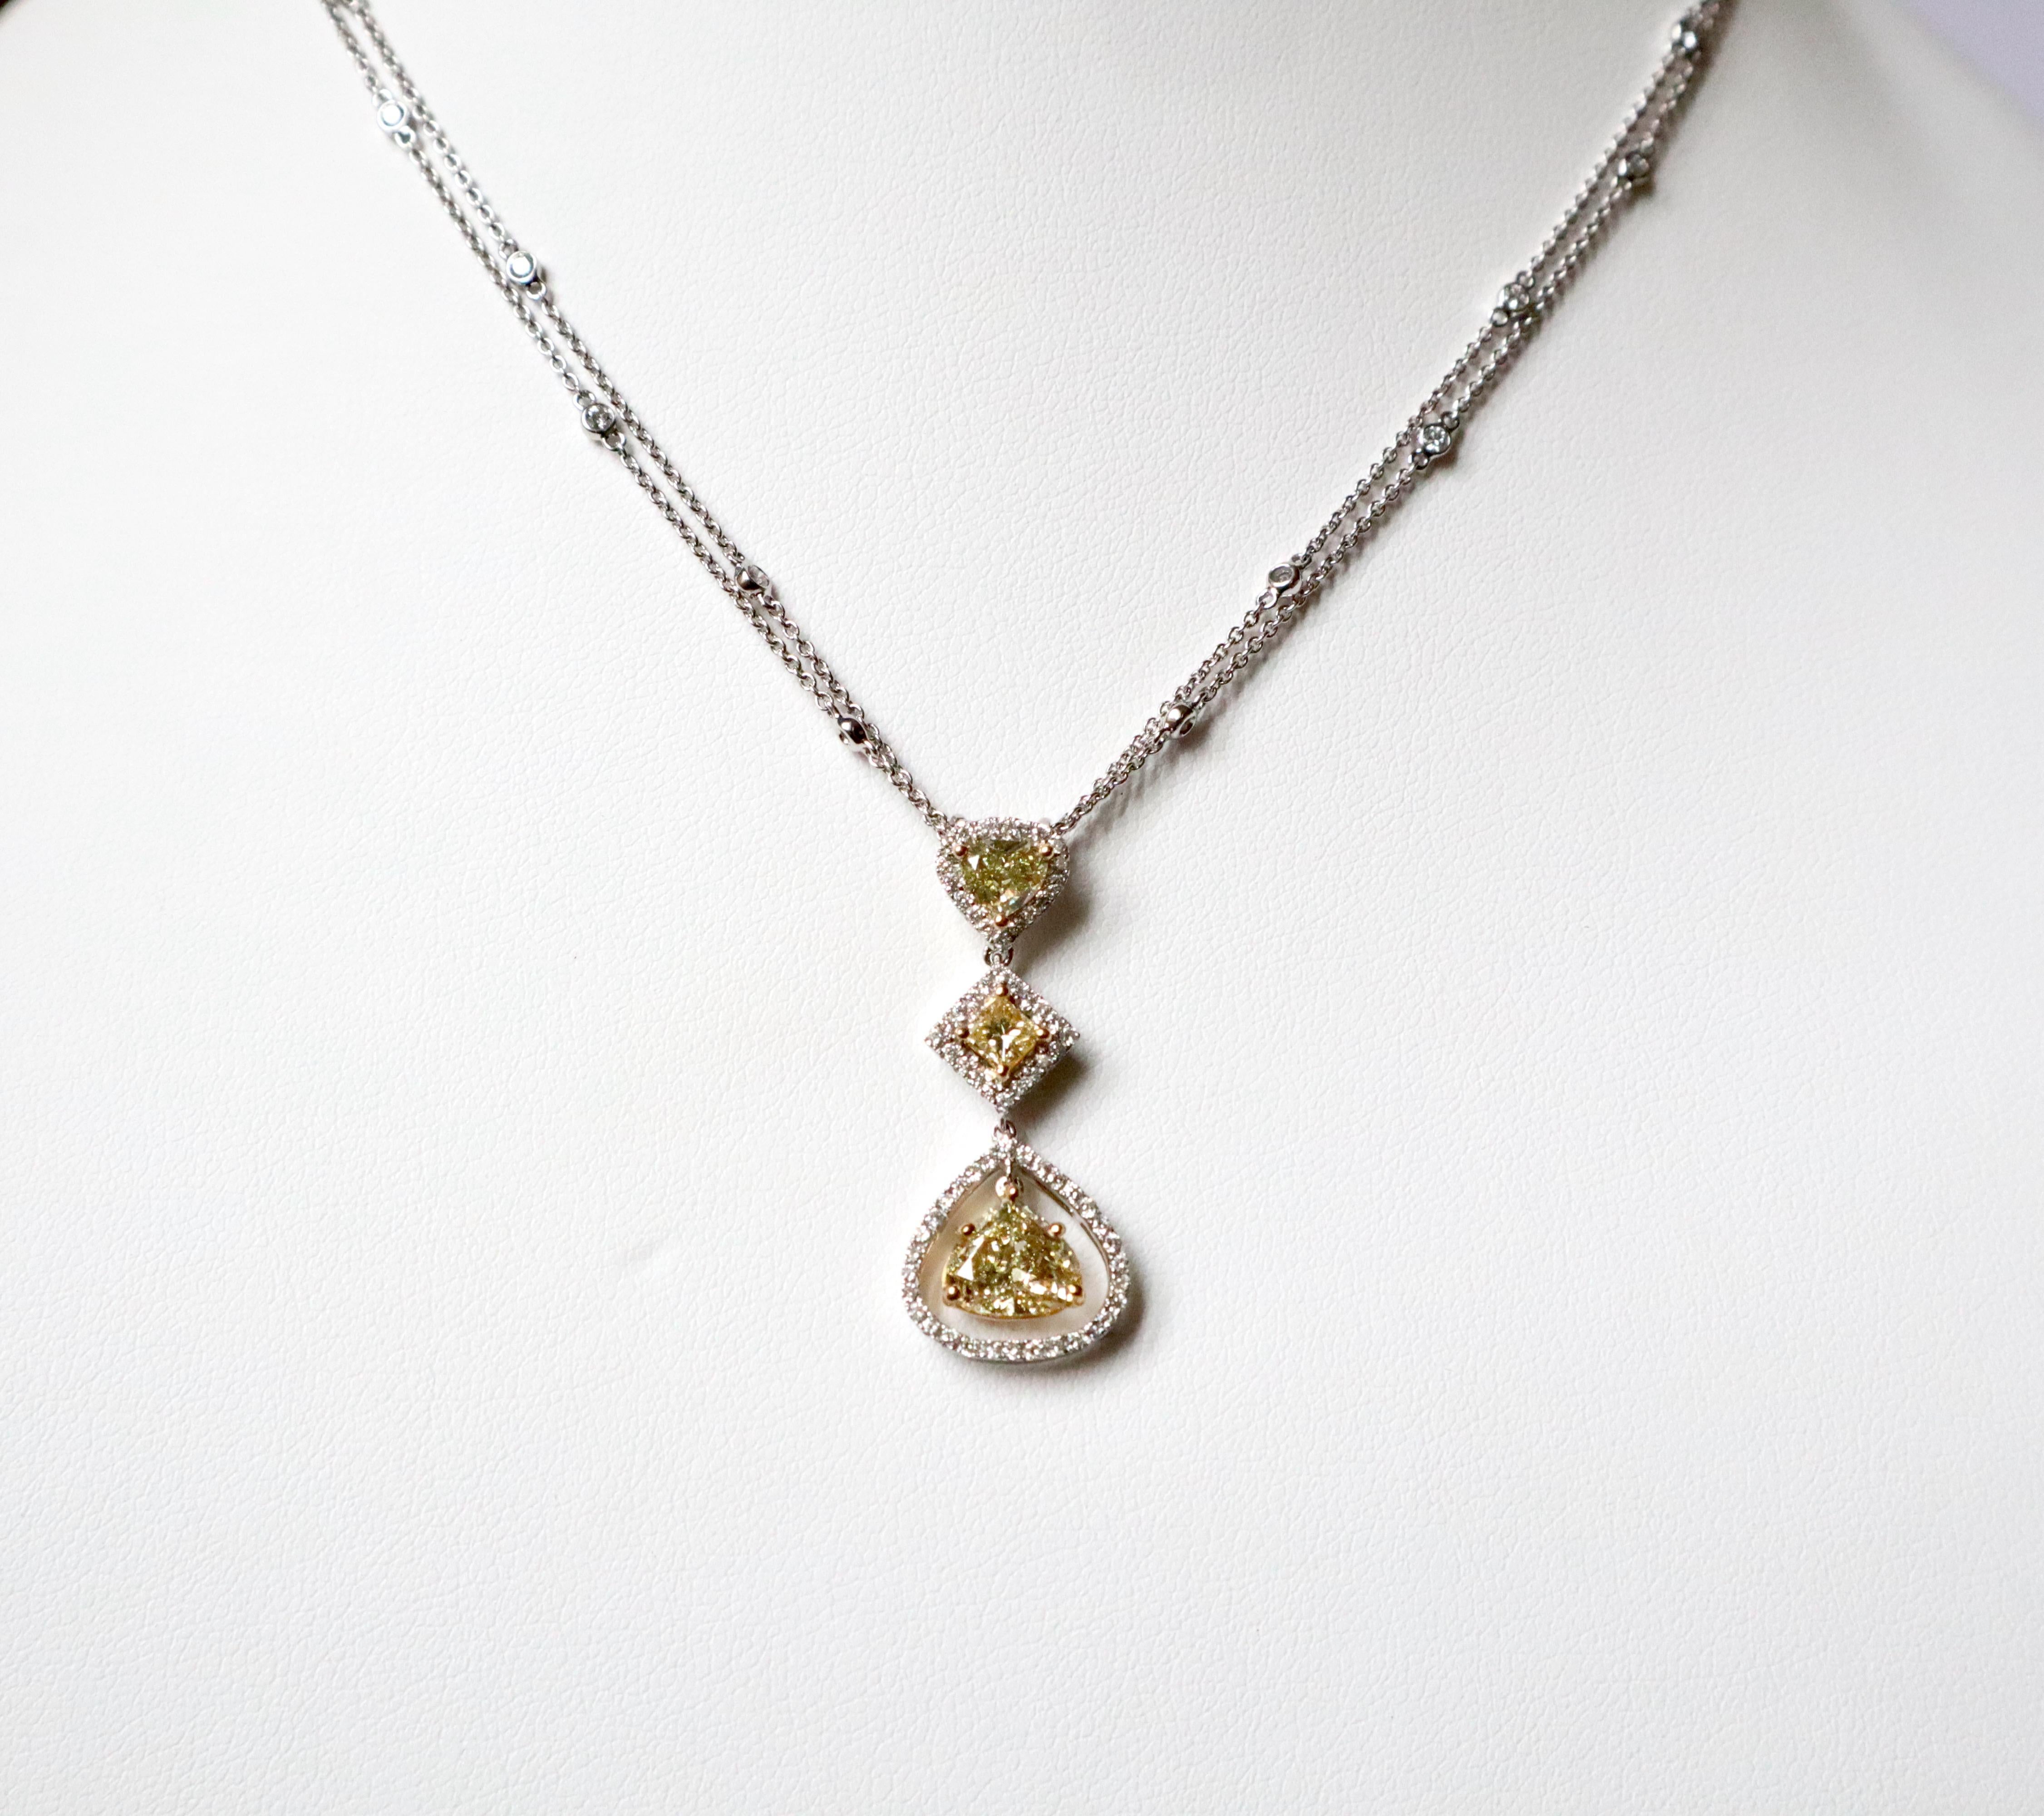 Women's Necklace in 18 Carat White and Yellow Gold Heart Shaped Yellow Diamonds For Sale